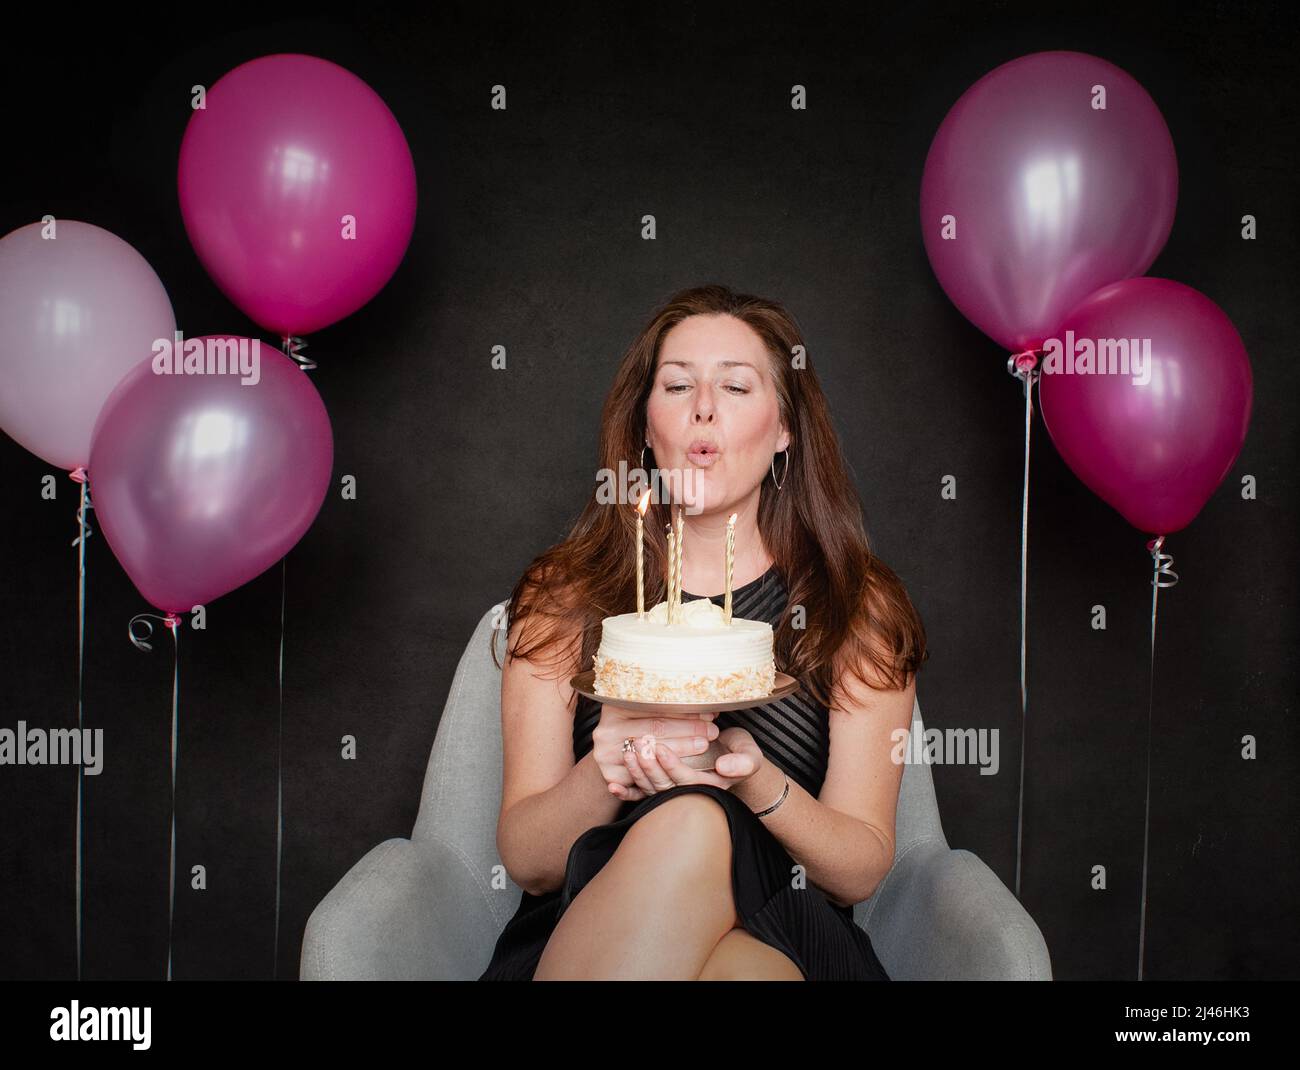 Pretty woman blowing candles out on birthday cake with balloons. Stock Photo